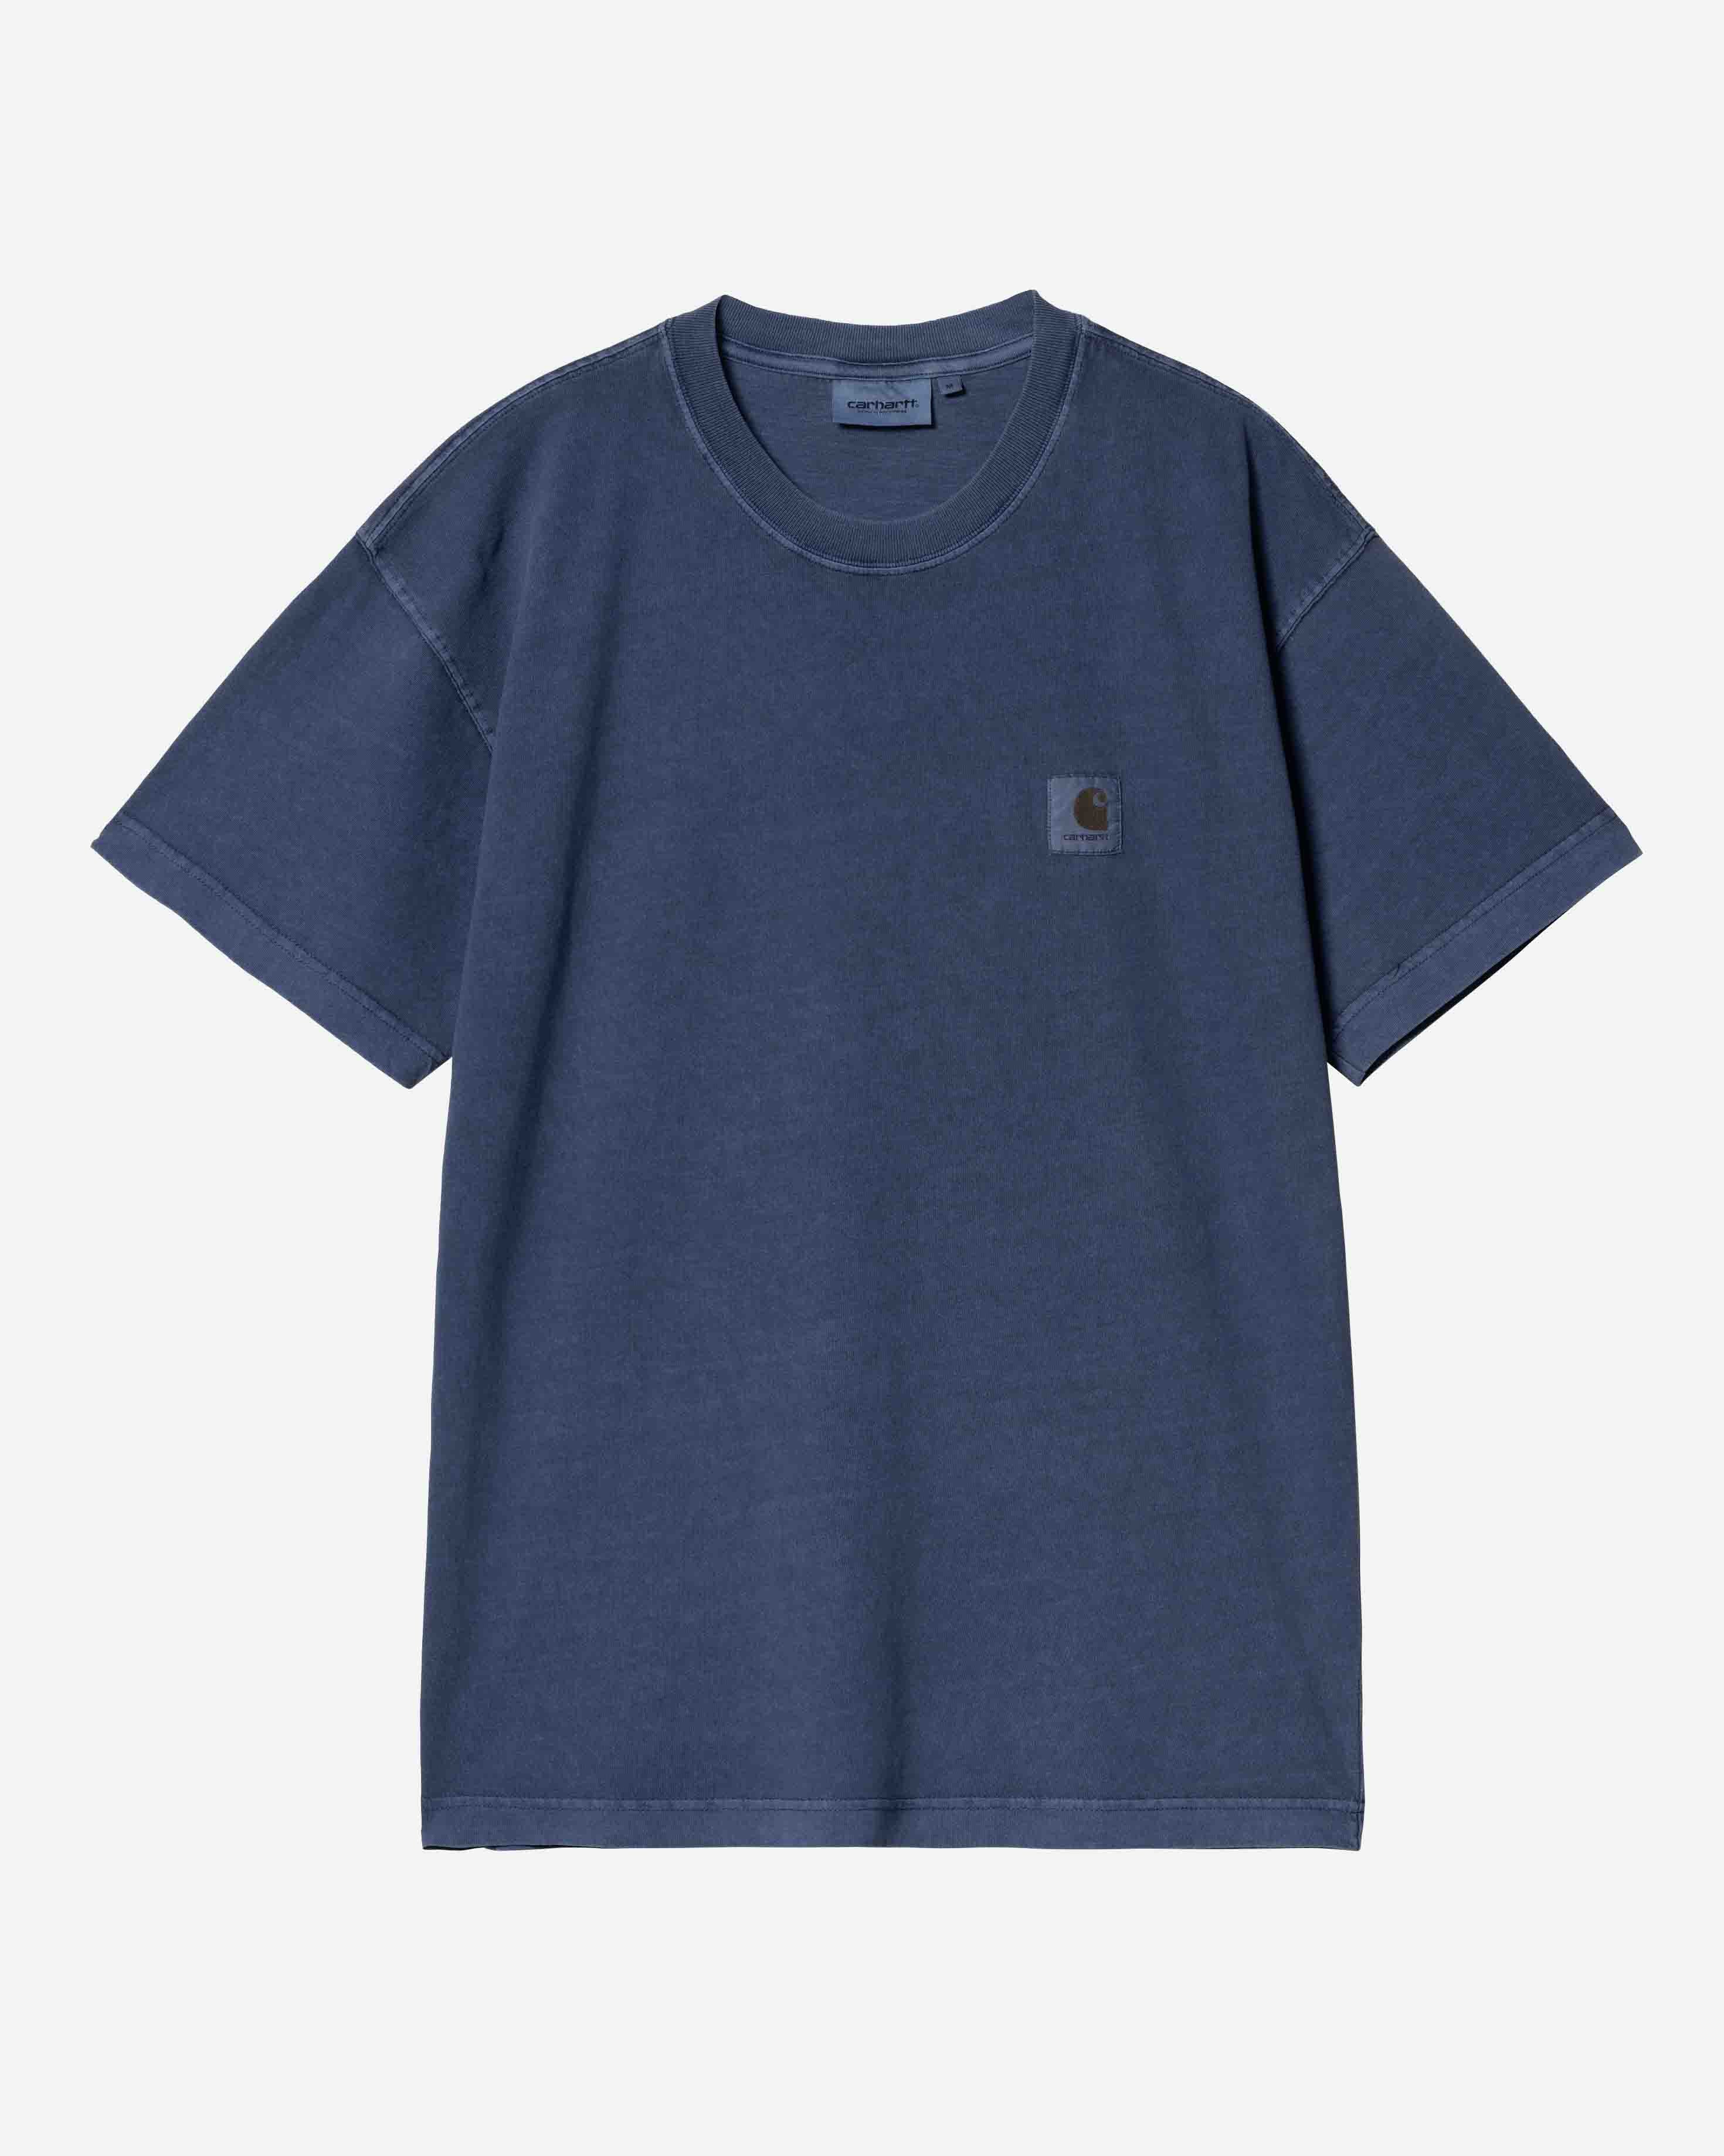 S/S Nelson T-Shirt image